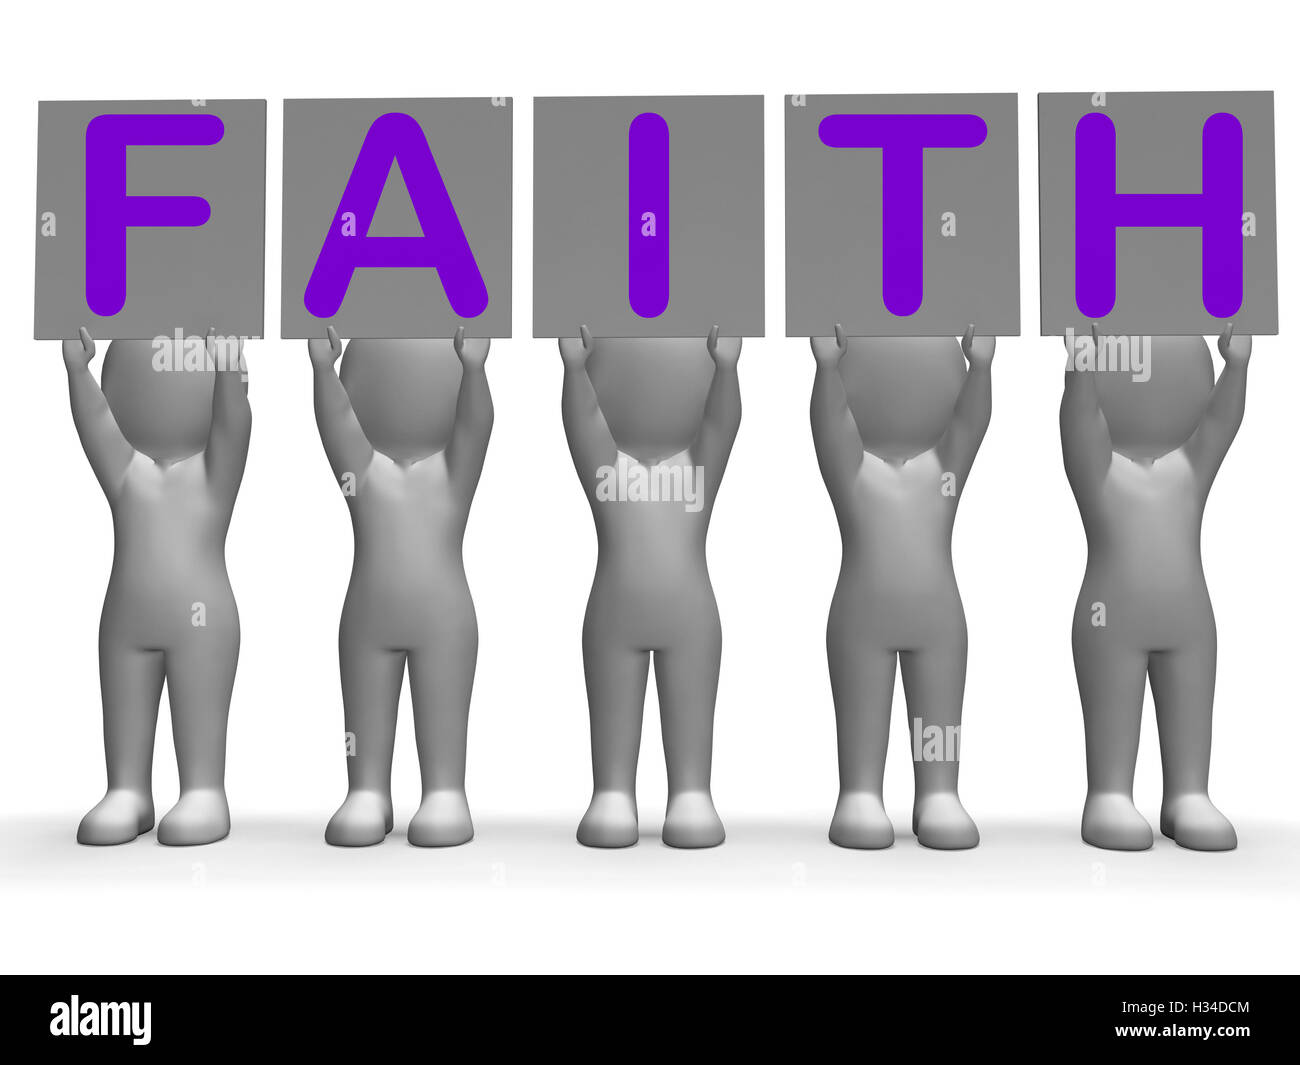 Faith Banners Shows Belief And Religion Stock Photo